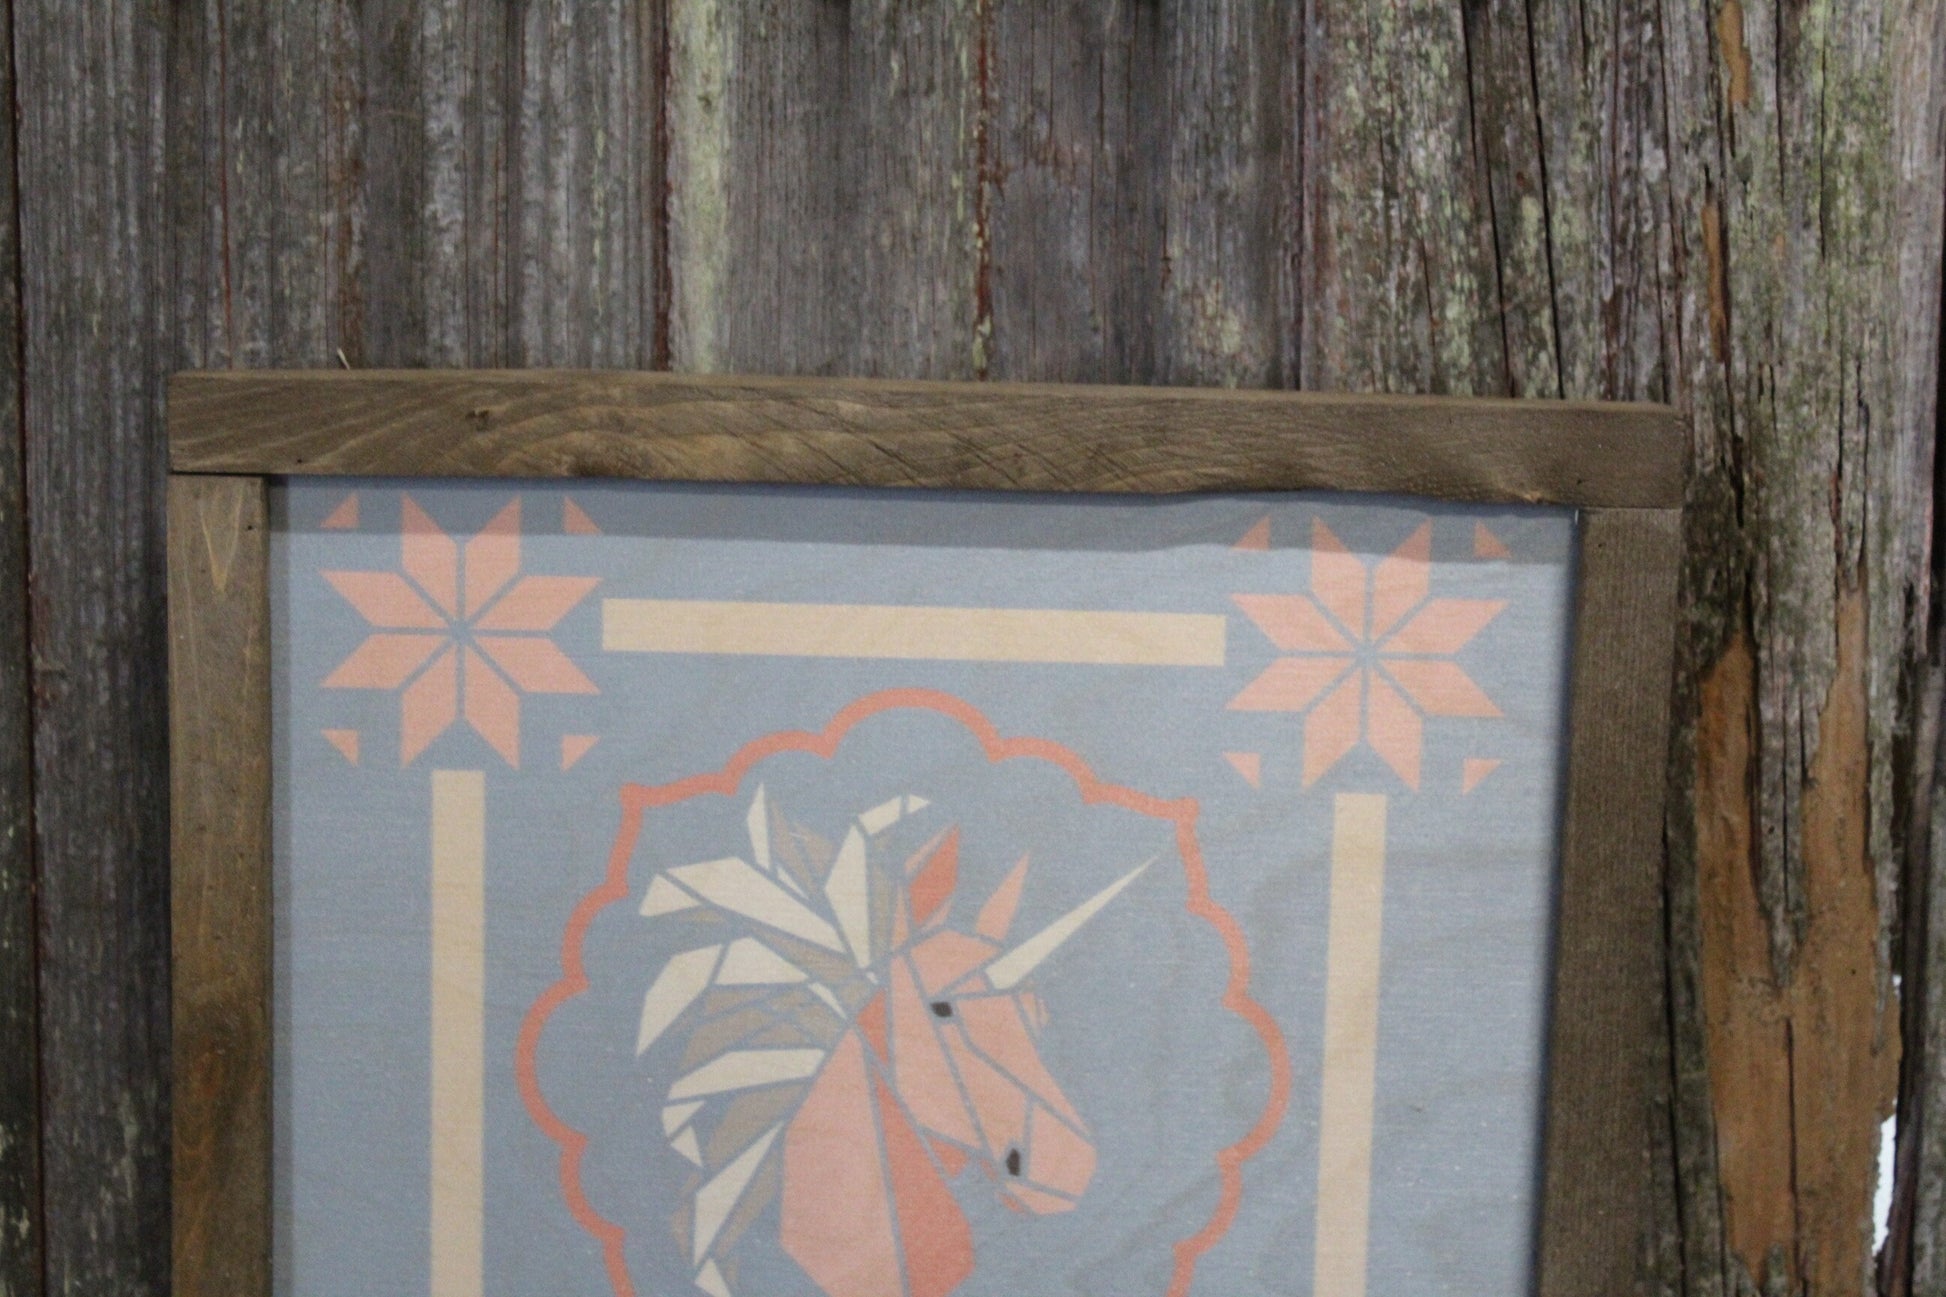 Unicorn Barn Quilt Wood Sign Stylized Pastel Origami Shapes Country Square Pattern Block Wall Art Farmhouse Primitive Rustic